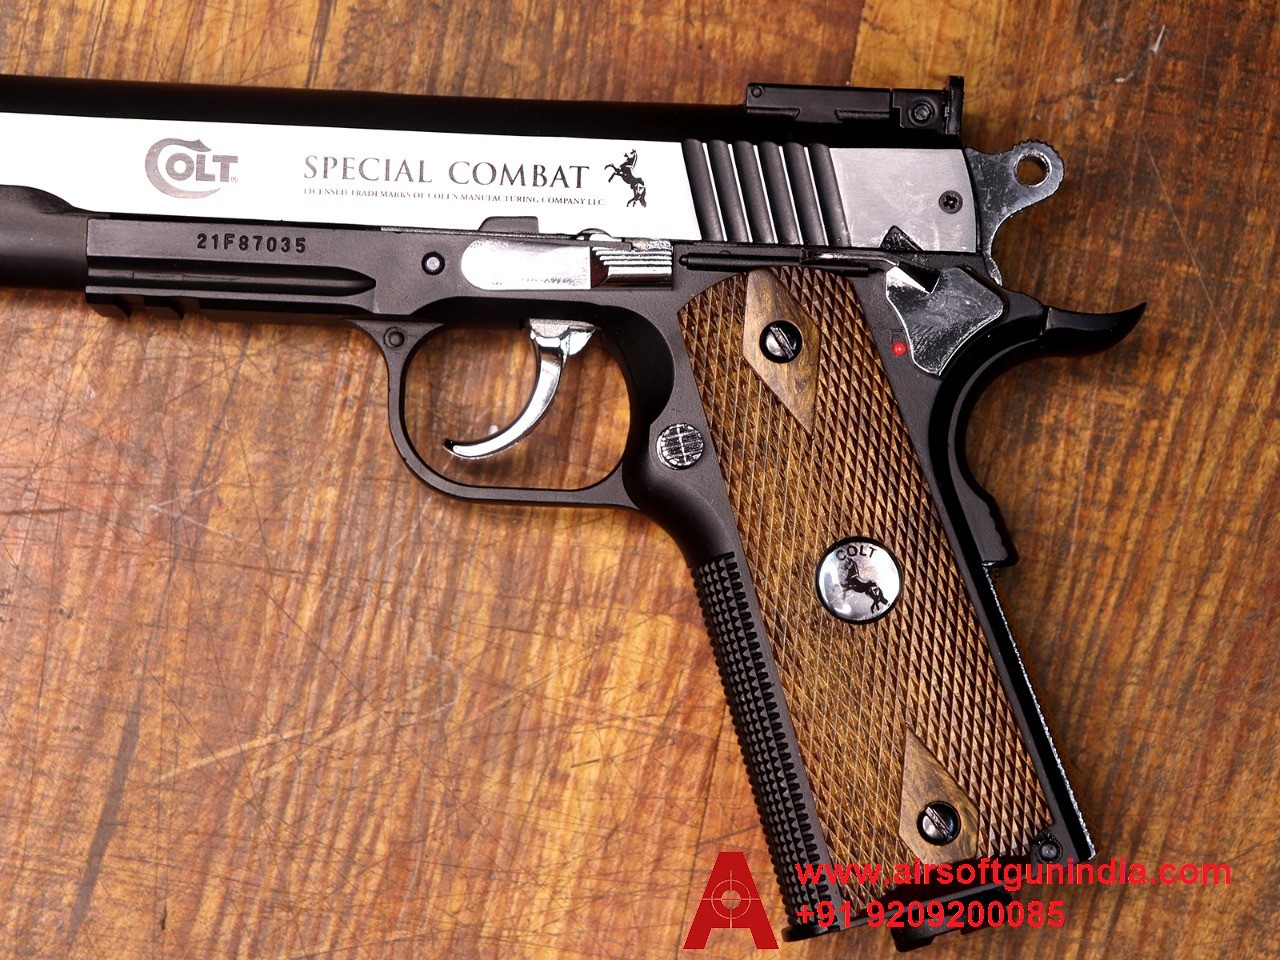 Colt 1911 Special Combat Classic 4.5mm, .177cal Co2 BB Air Pistol By Airsoft Gun India